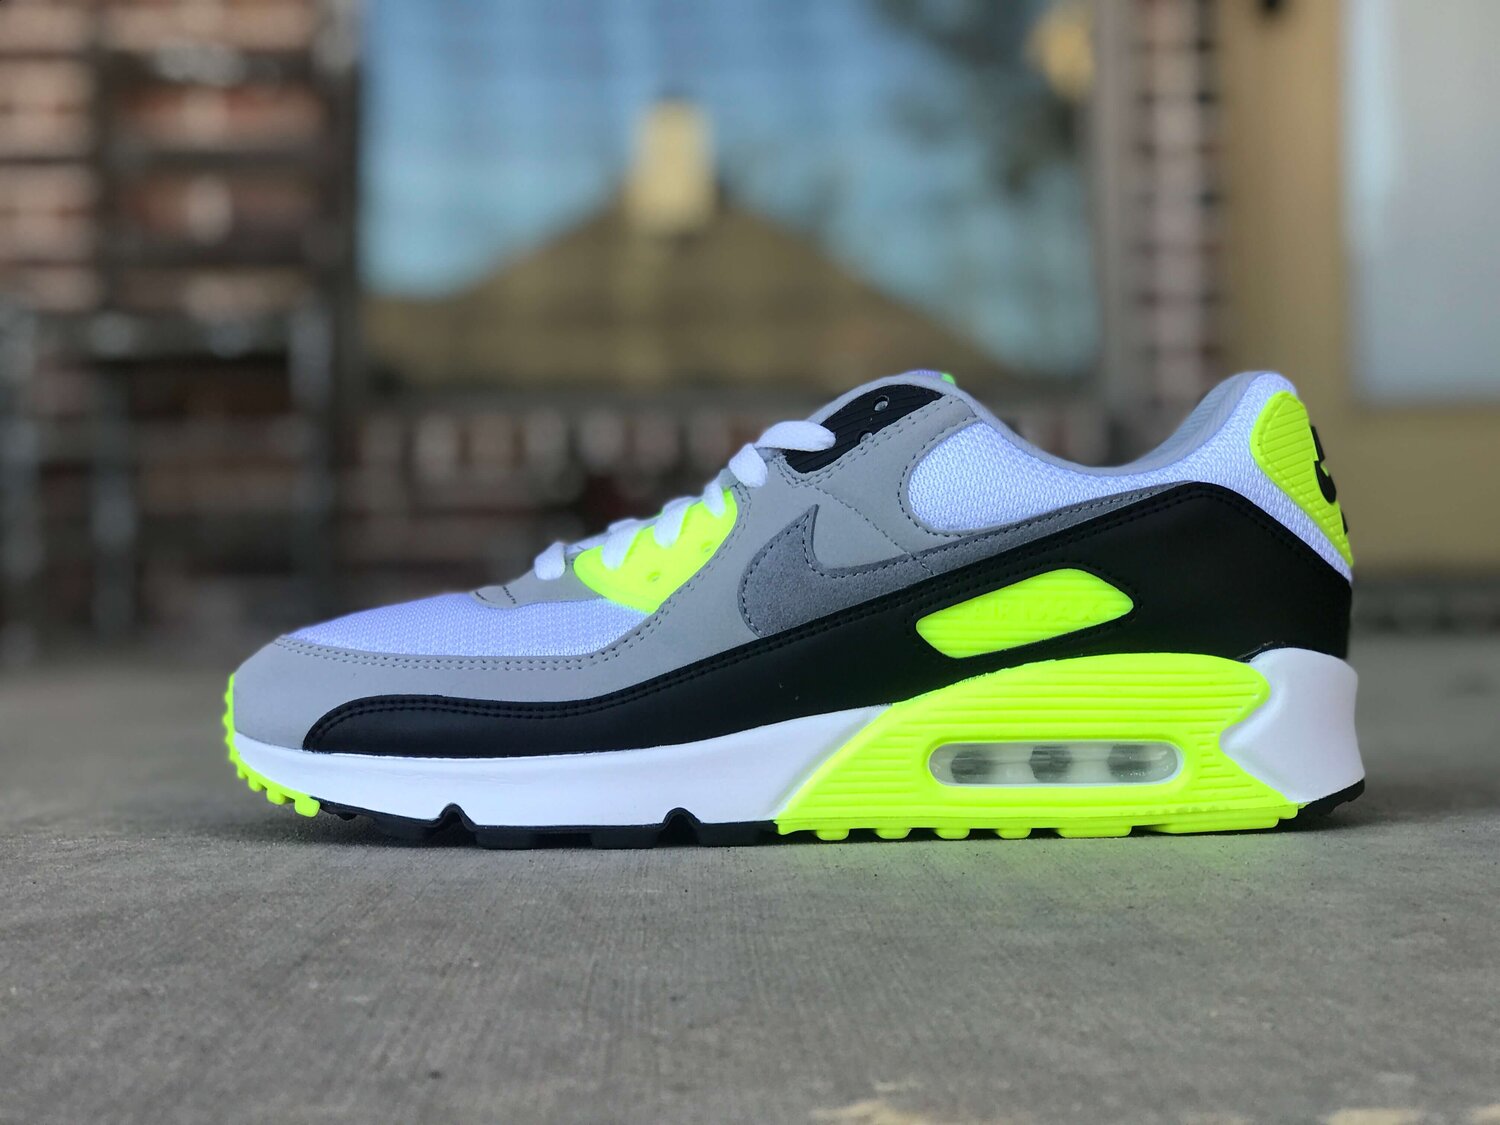 A Detailed Unboxing Of The 2020 Nike Air Max 90 [Must Watch] | The